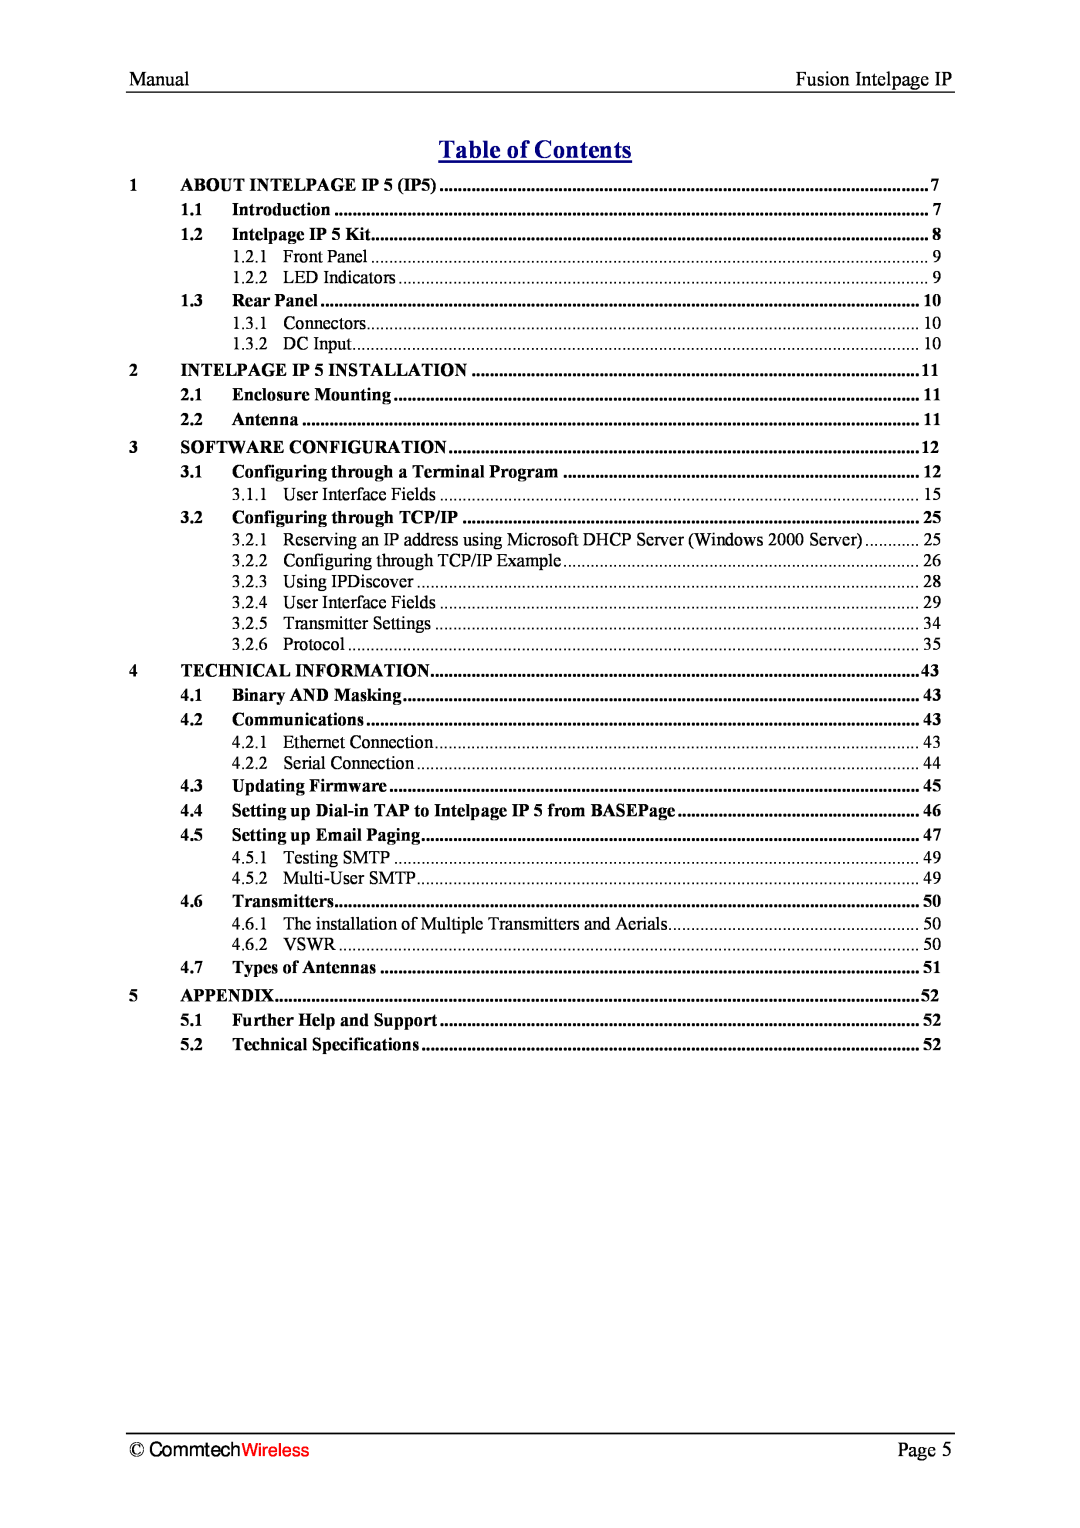 Fusion INTELPage IP 5, 2.1 manual Table of Contents, CommtechWireless 